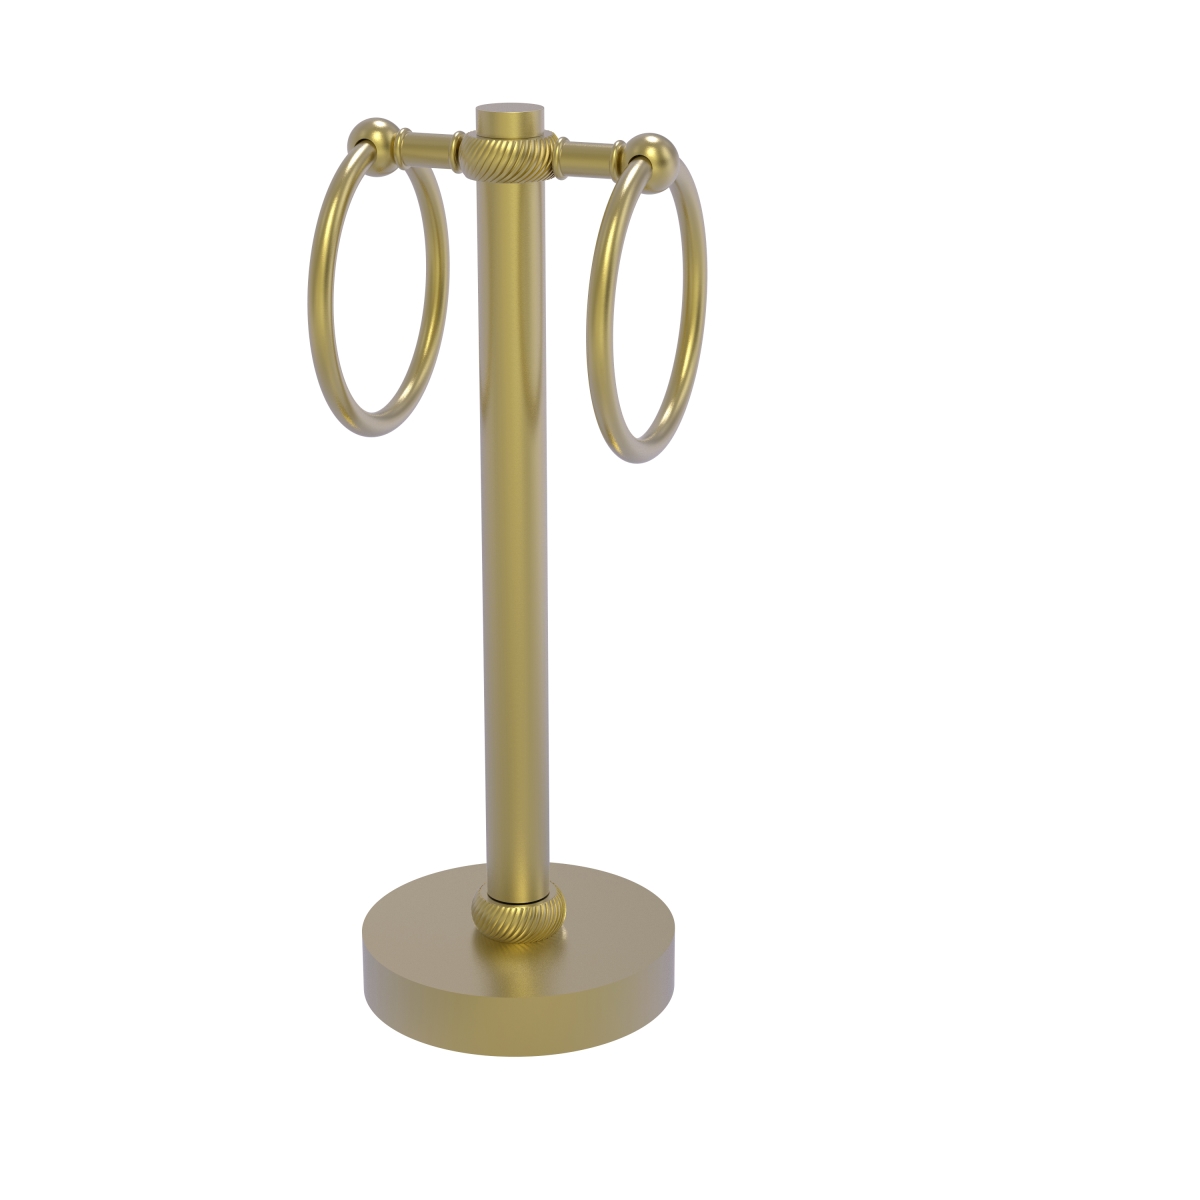 953t-sbr Vanity Top 2 Towel Ring Guest Towel Holder With Twisted Accents, Satin Brass